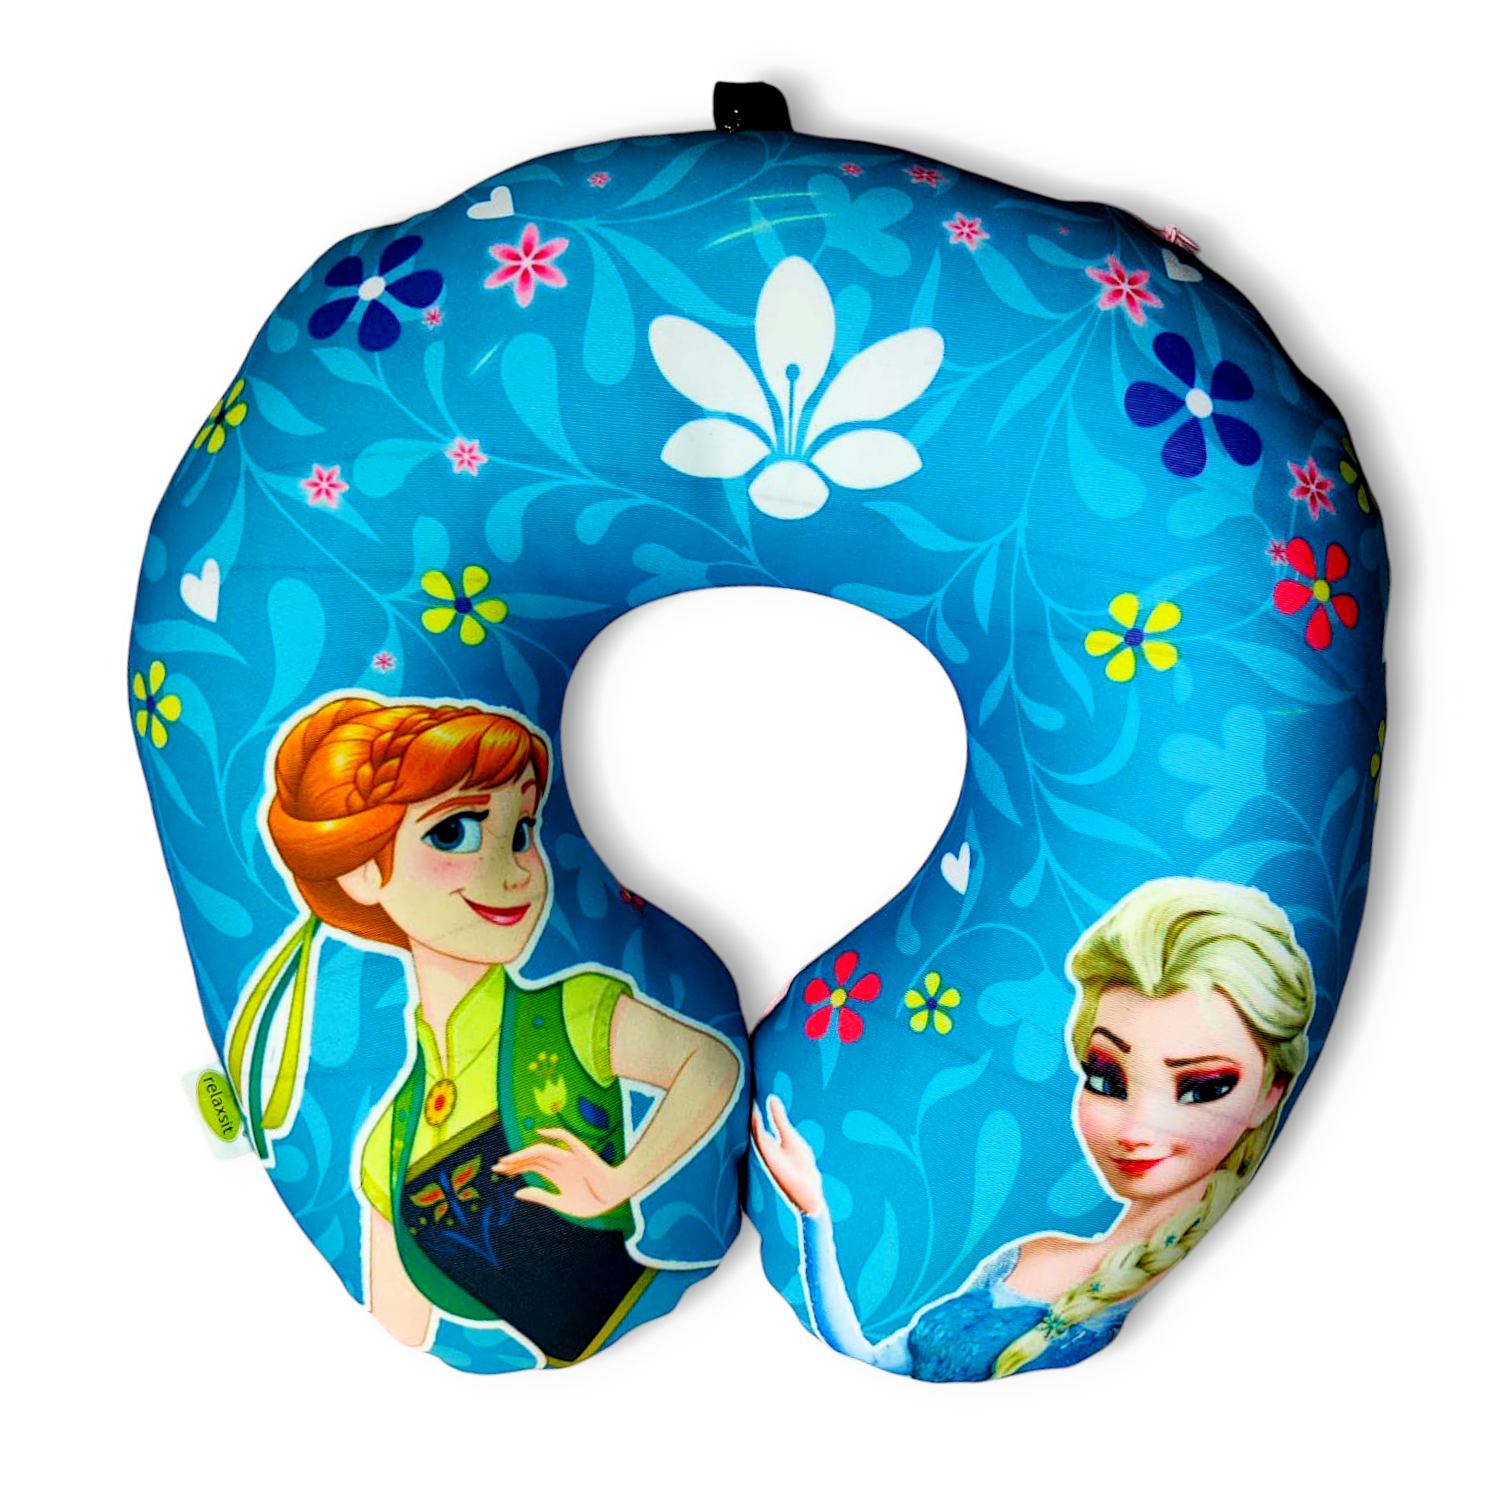 Relaxsit Chillo Pillow printed – kids, youngsters, adults designs Extremely Soft and Comfortable Neck pillow – Head and Chin Support Travel Neck Pillow - Car Neck Pillow For Travel - Travel Neck pillows